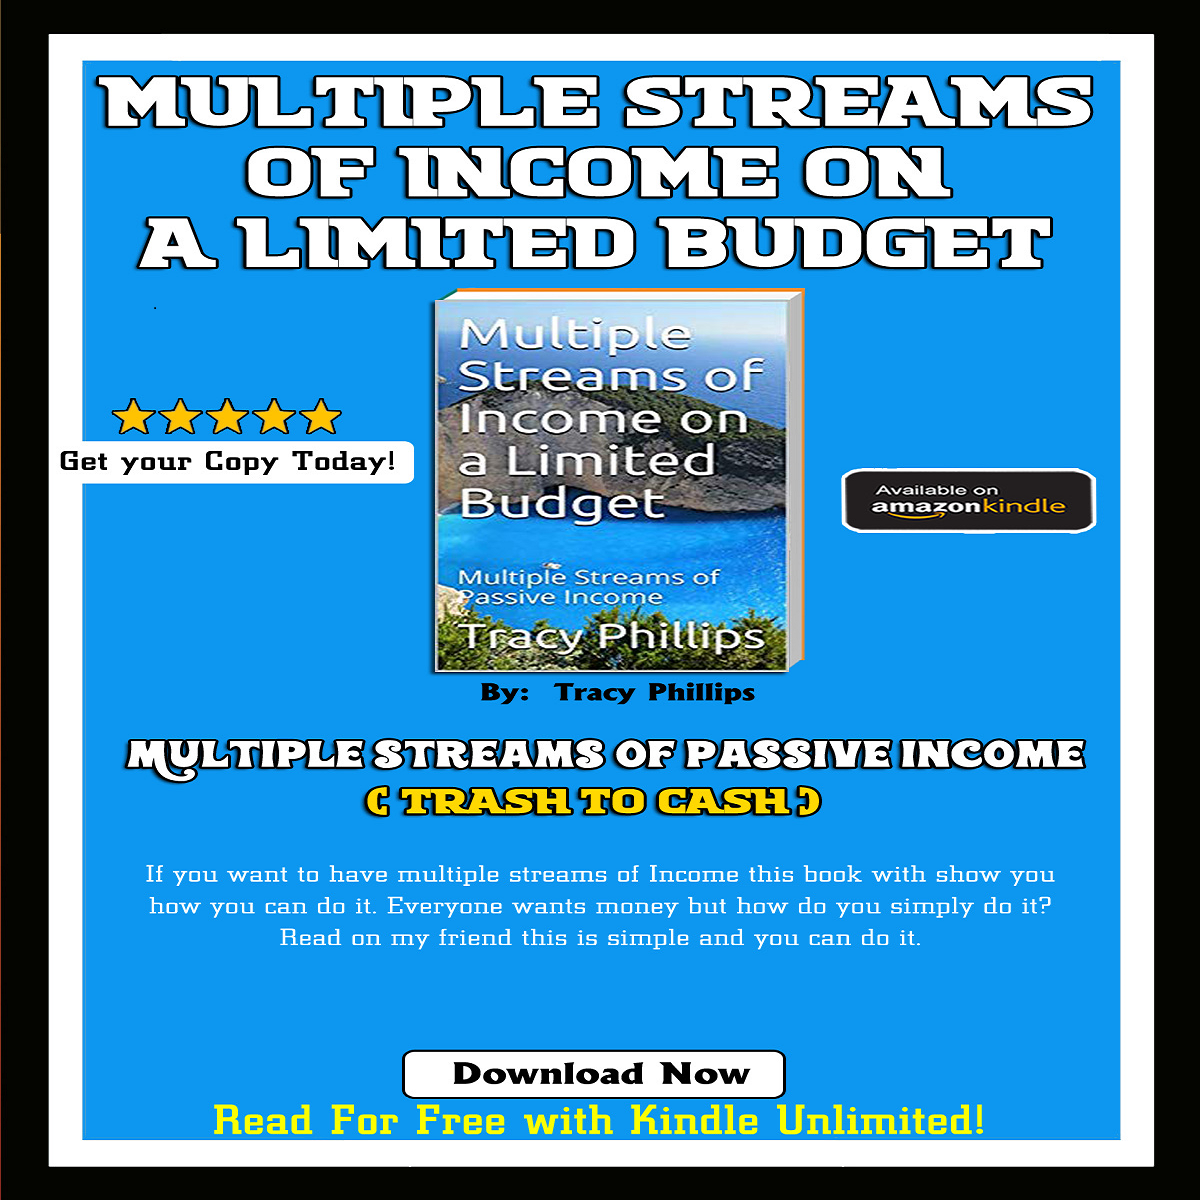 Multiple Streams of Income on a Limited Budget: